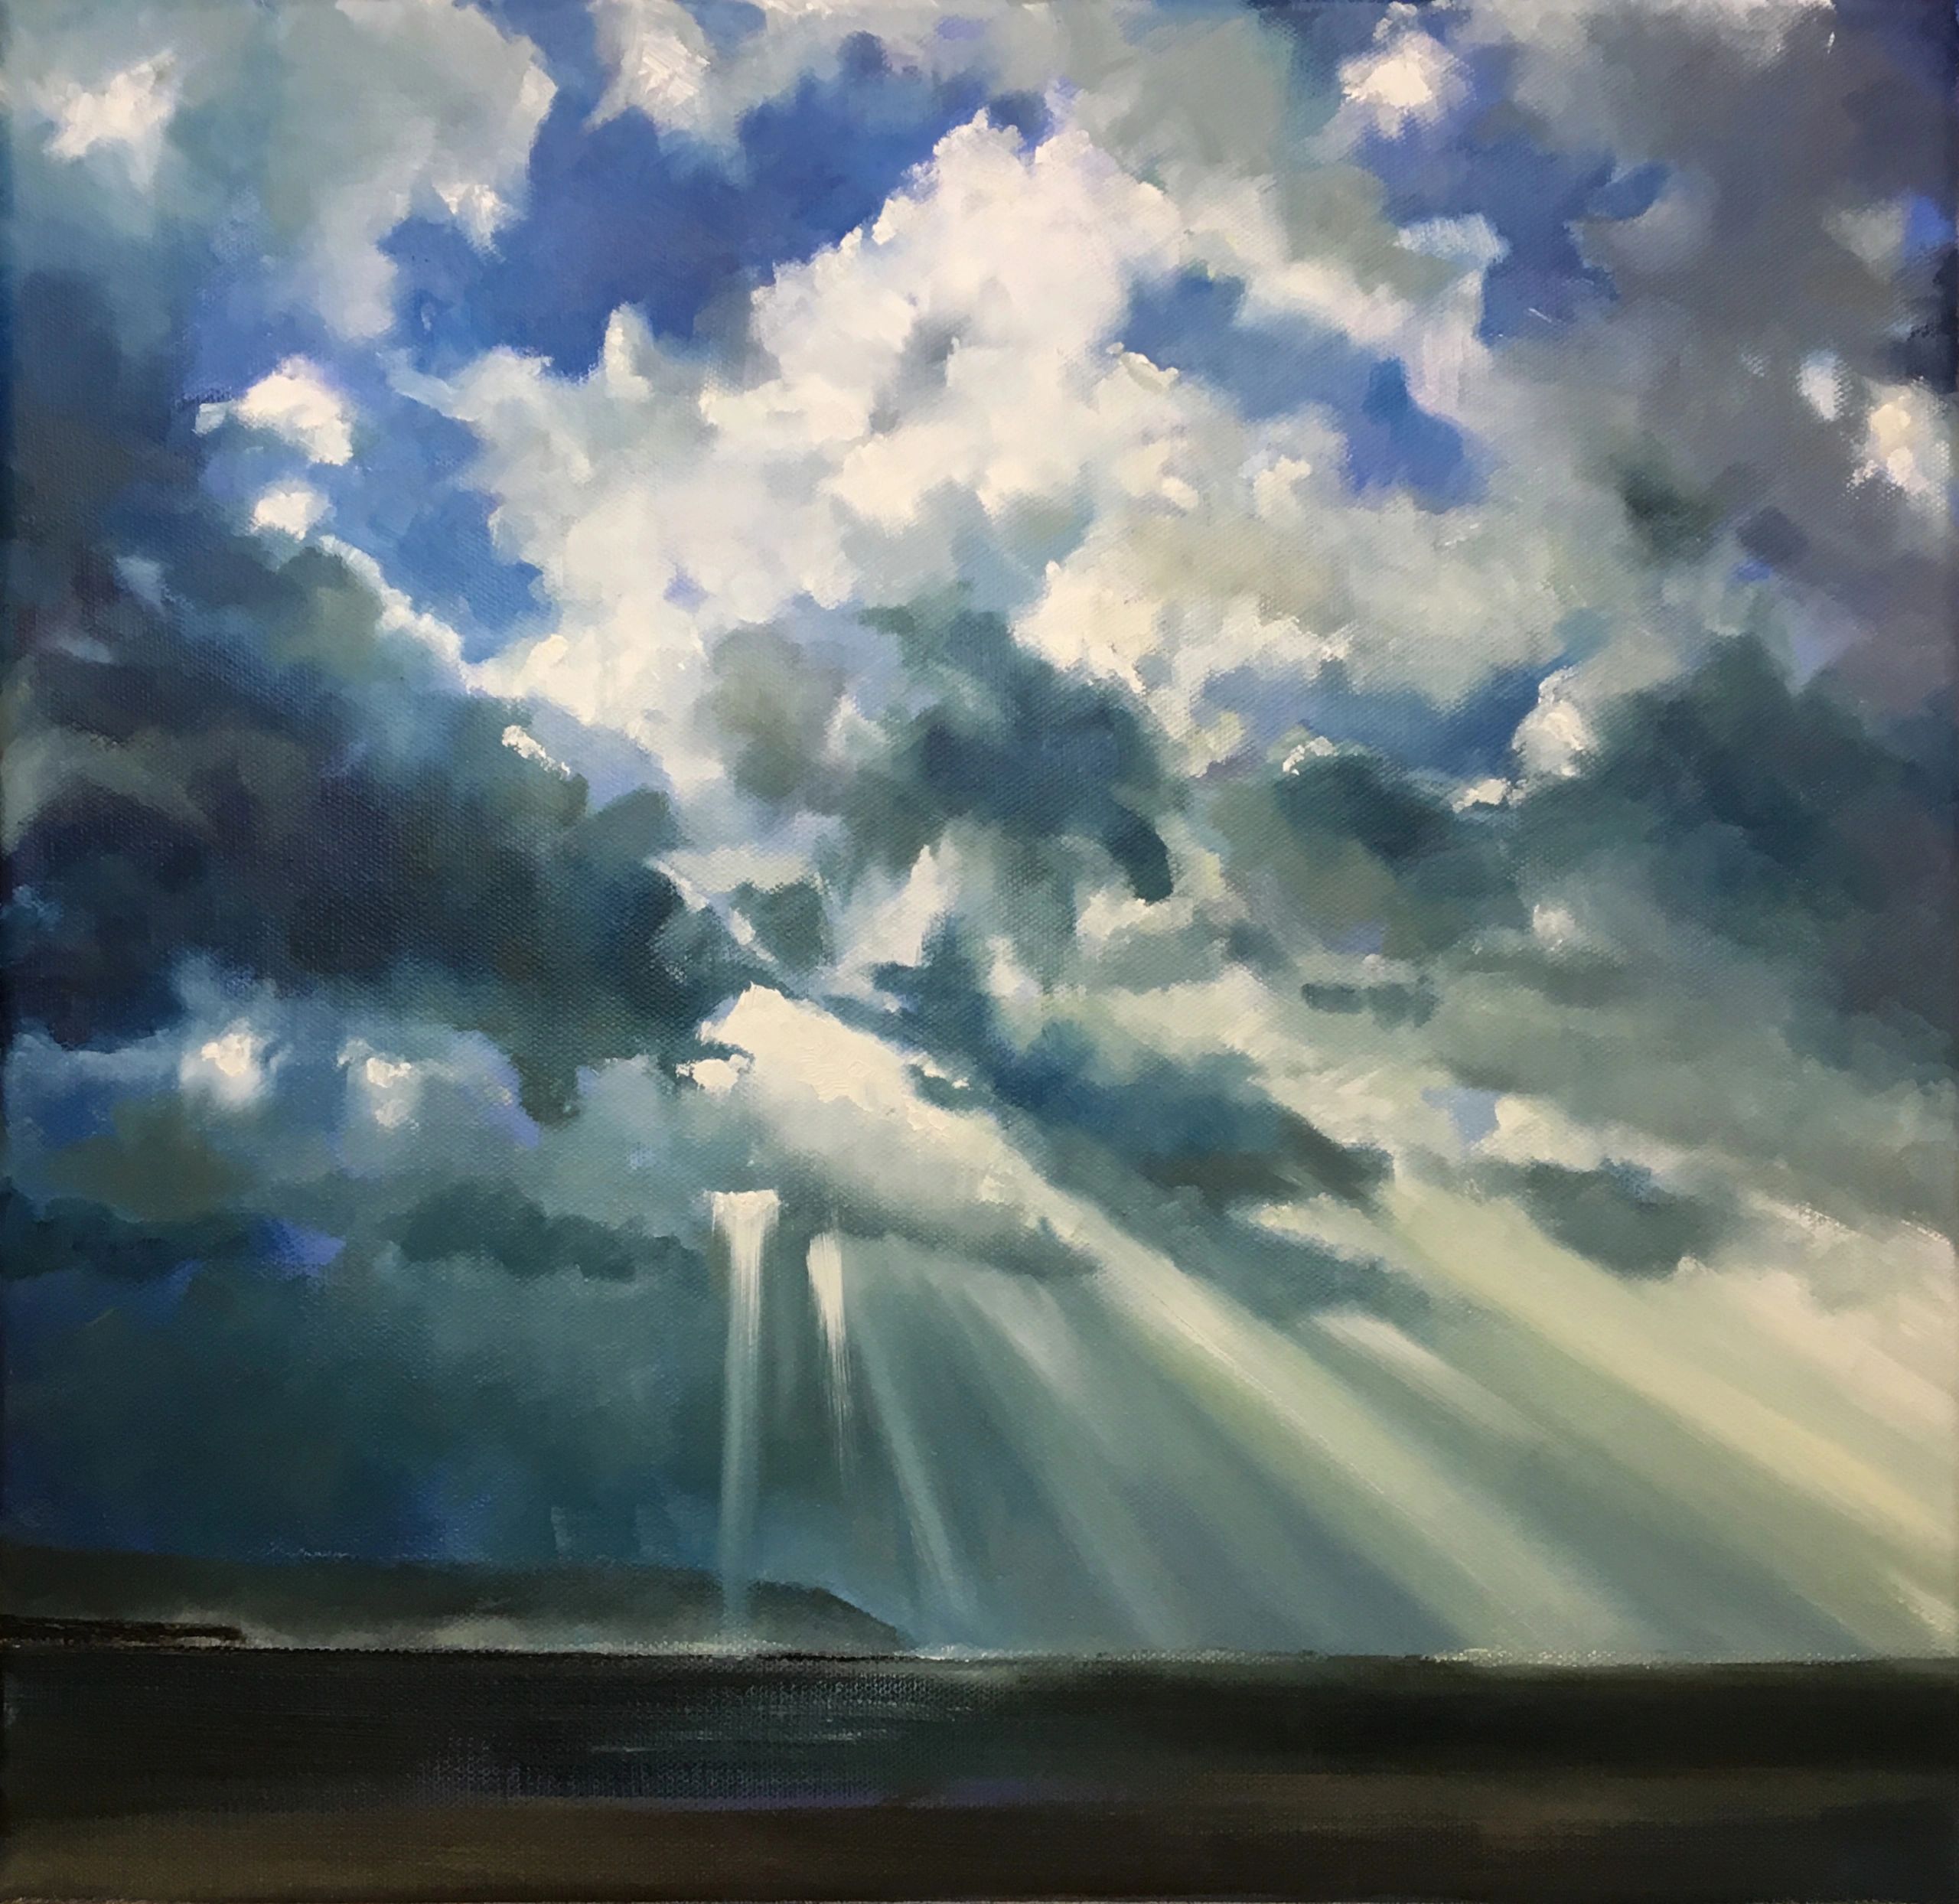 Oil painting on canvas. Sunlight bursting through clouds above sea. Distant headland.